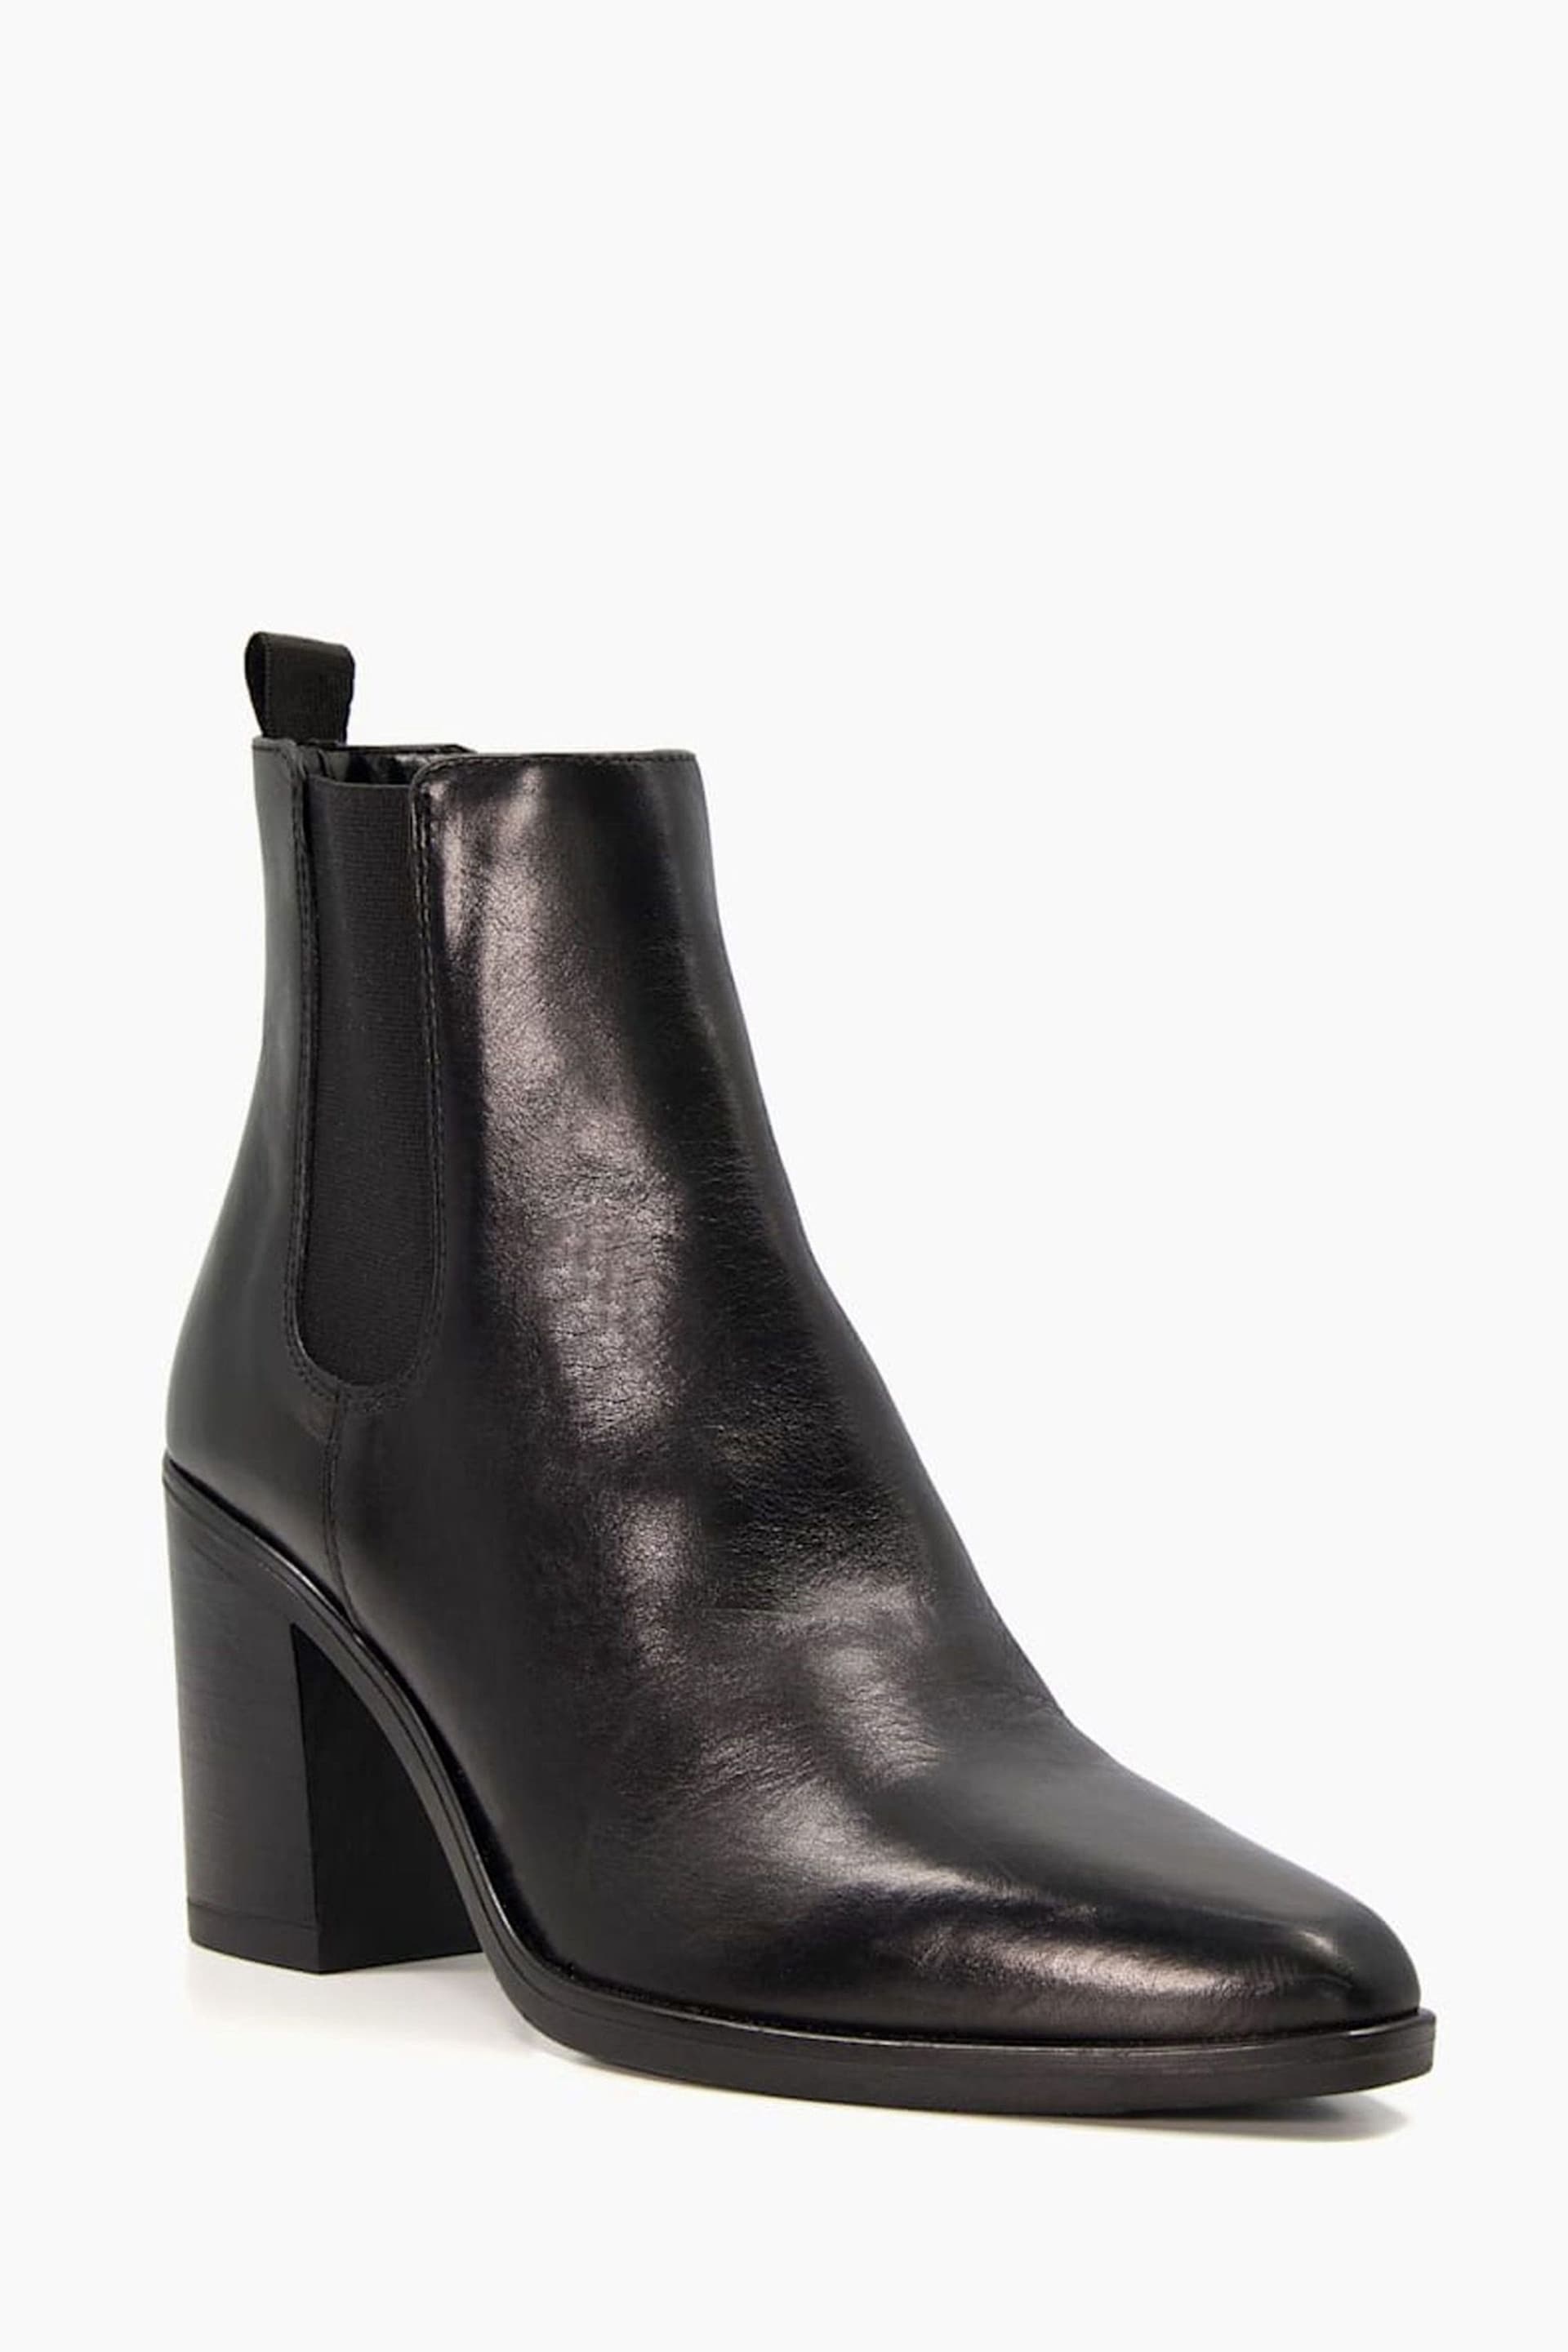 Dune London Black Prea High Western Chelsea Boots - Image 2 of 5